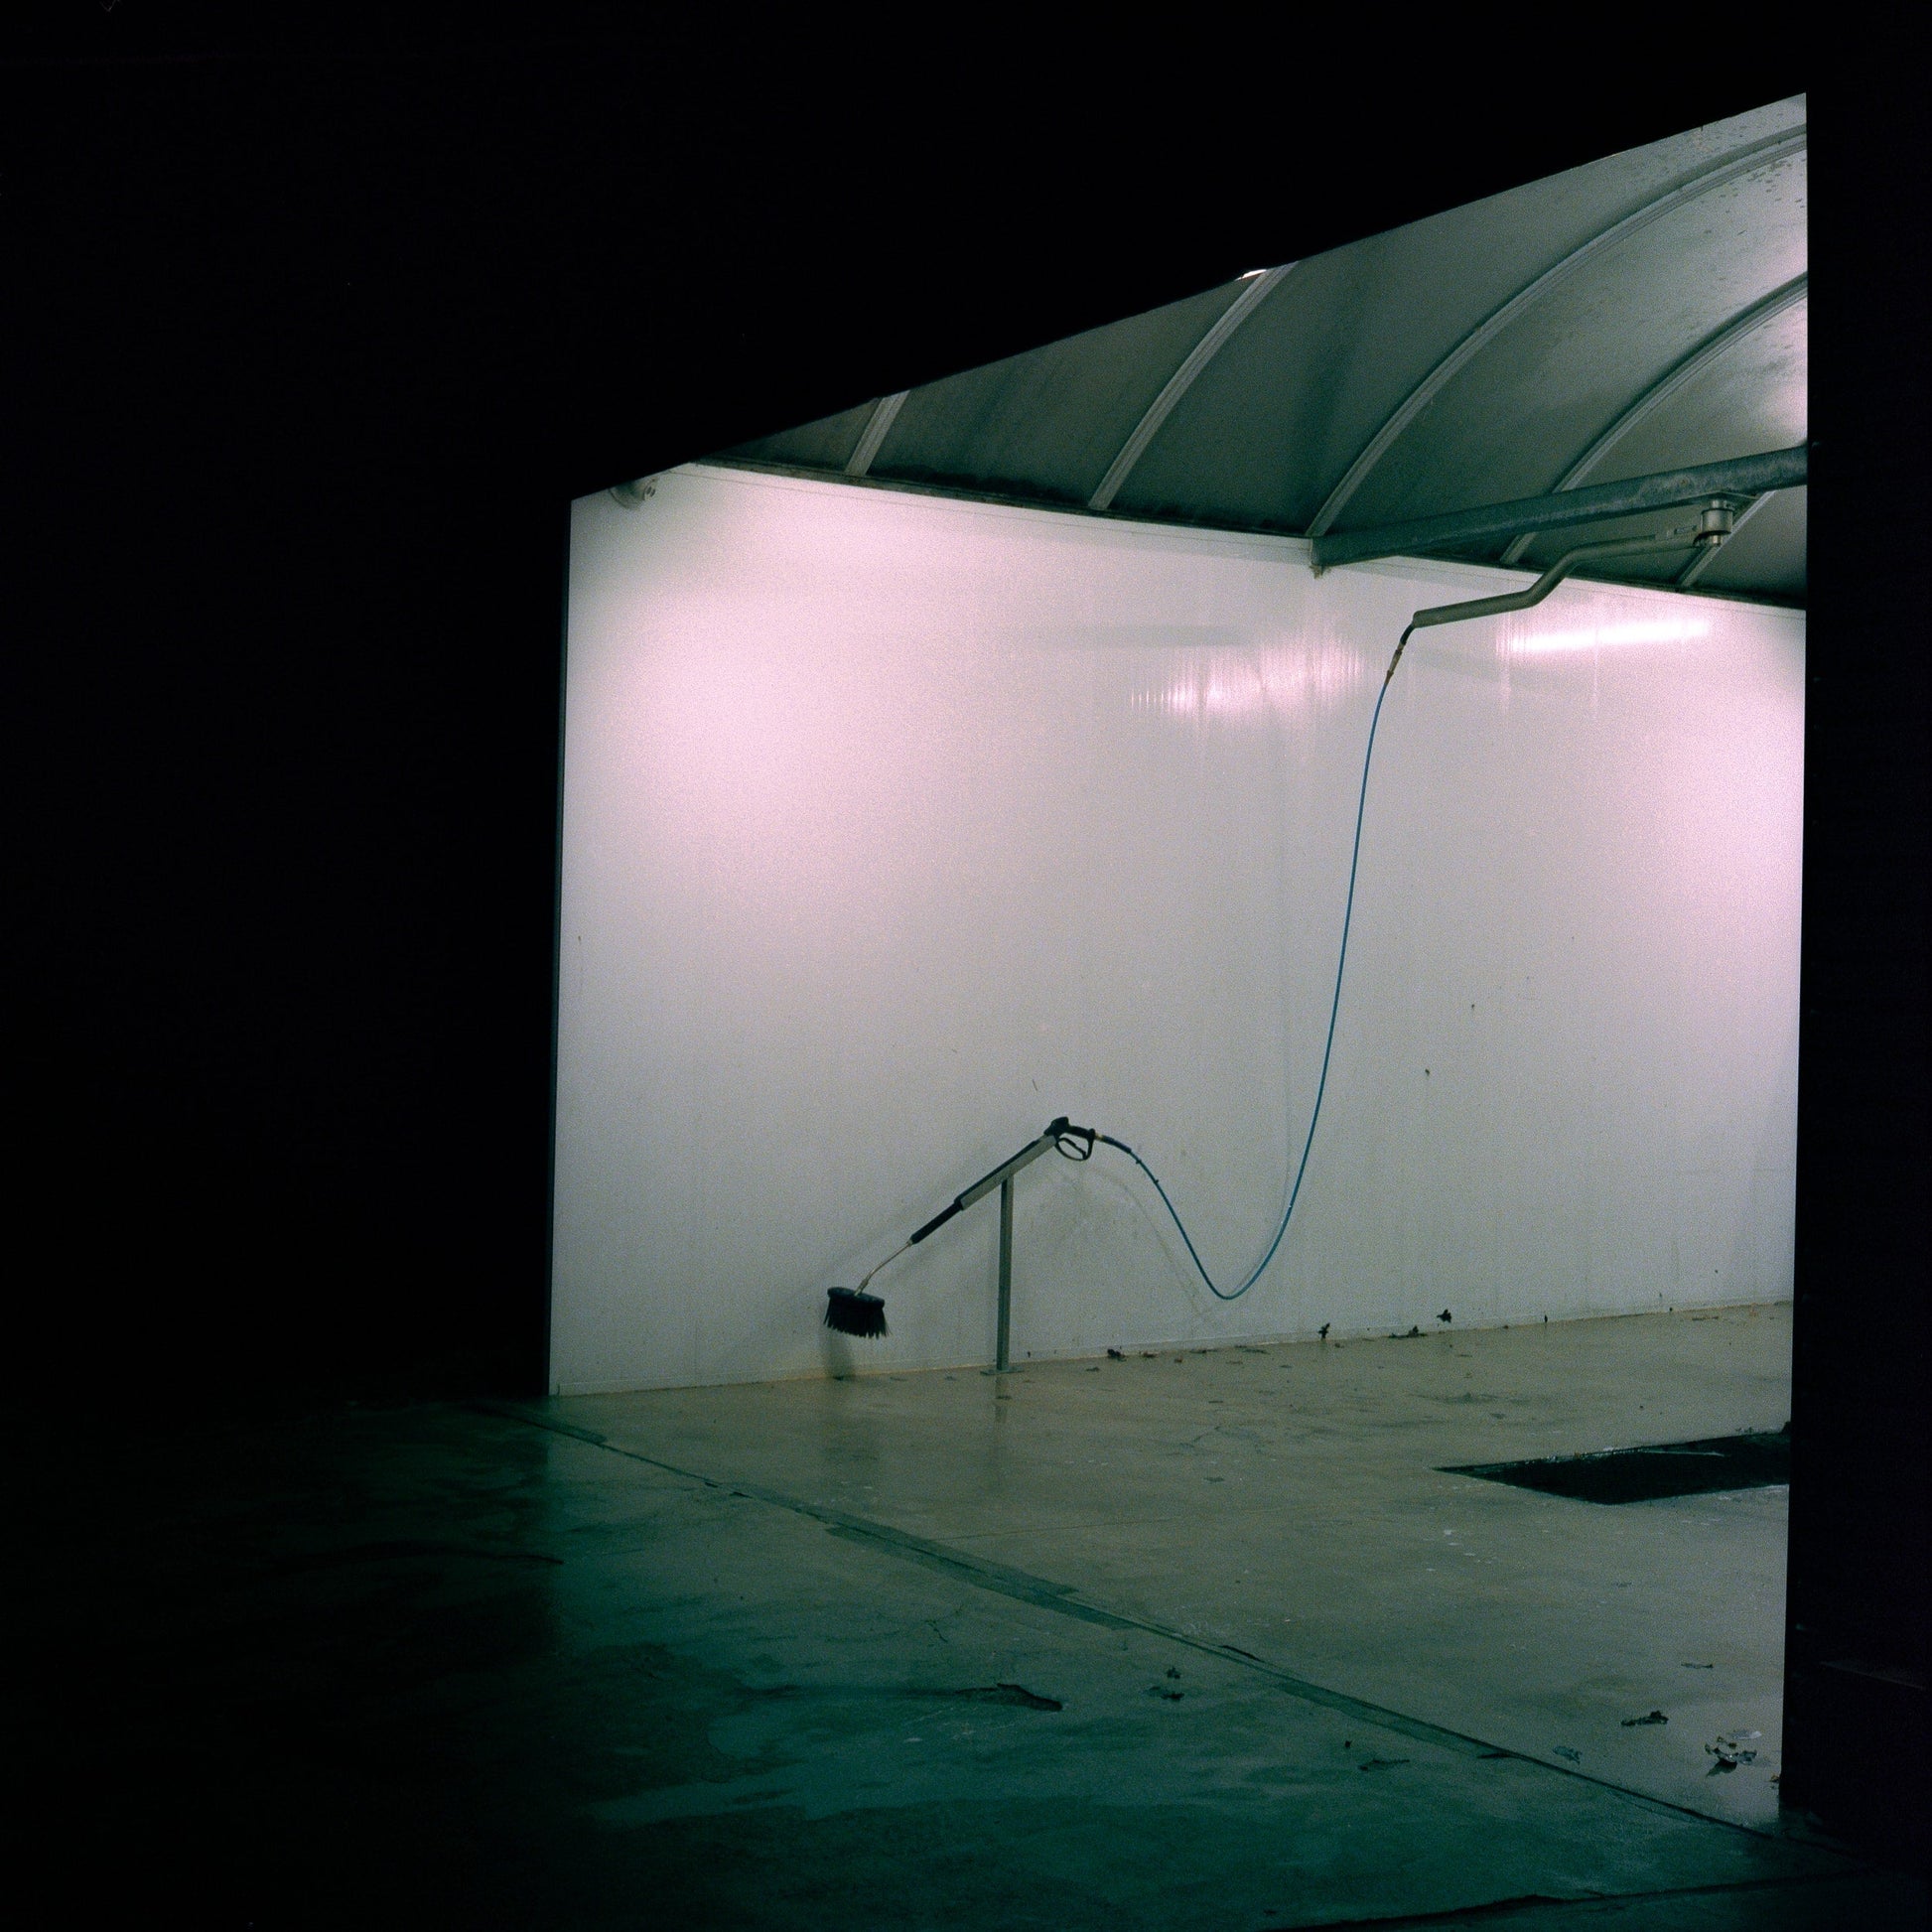 The artwork 'Exterior #6' by Jildo Tim Hof portraying a carwash, looking in from the dark outdoors